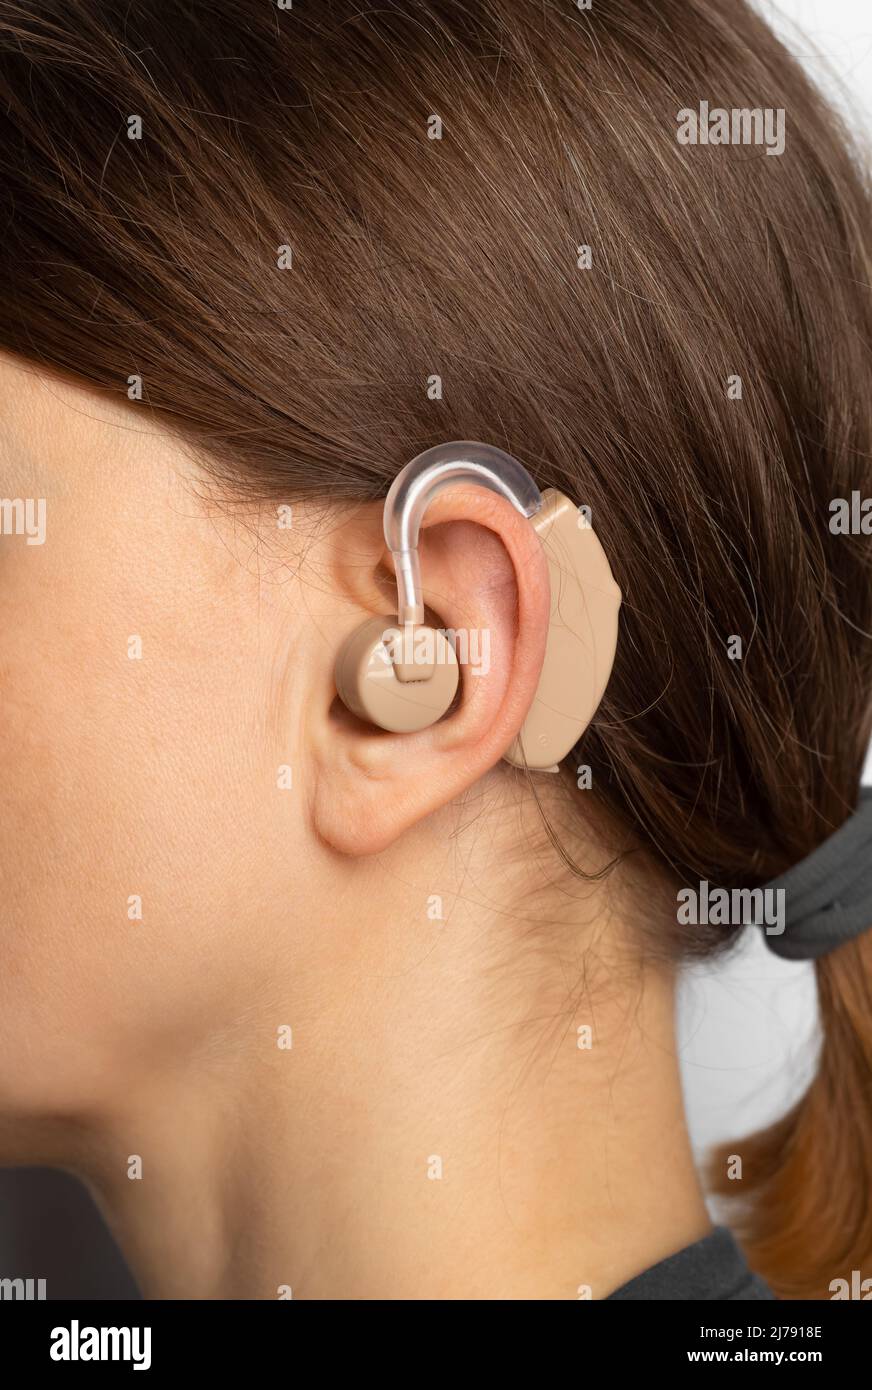 Hearing aid on a woman's ear, close-up. Stock Photo